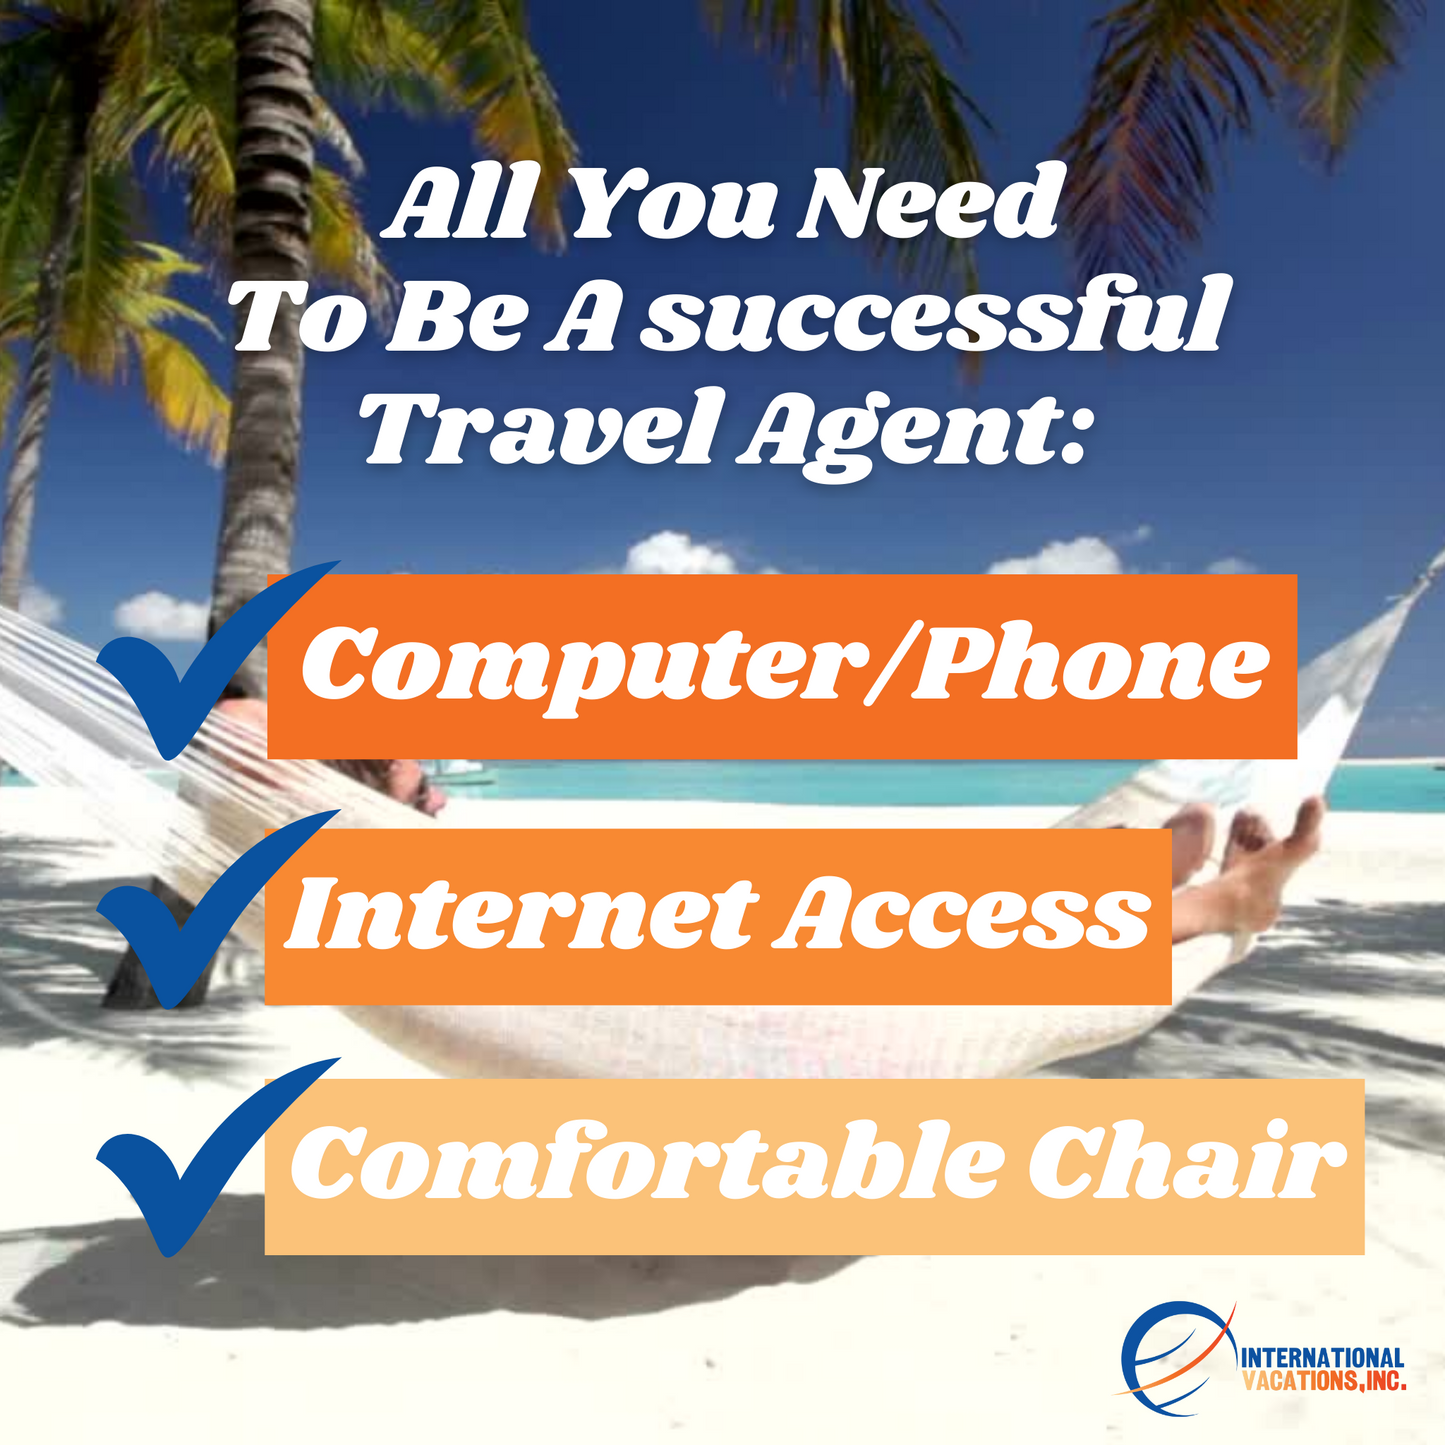 Hotel and Condo Agent - Hosted Travel Agent Program